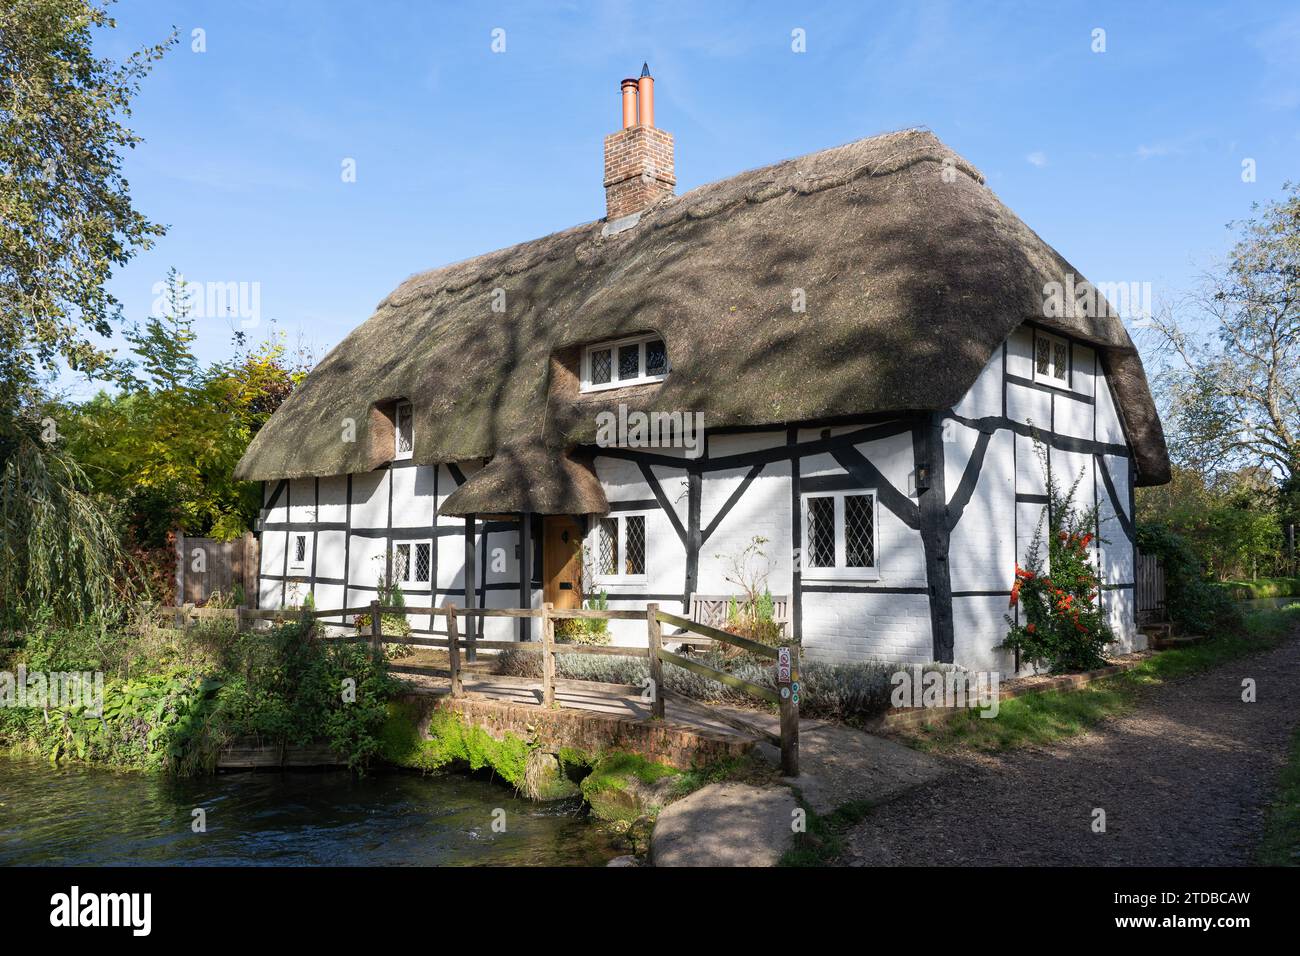 Grade II listed 17th century Fulling Mill on the river Alre in New Alresford, formerly used for the fulling of sheep's wool cloth. Hampshire, UK Stock Photo